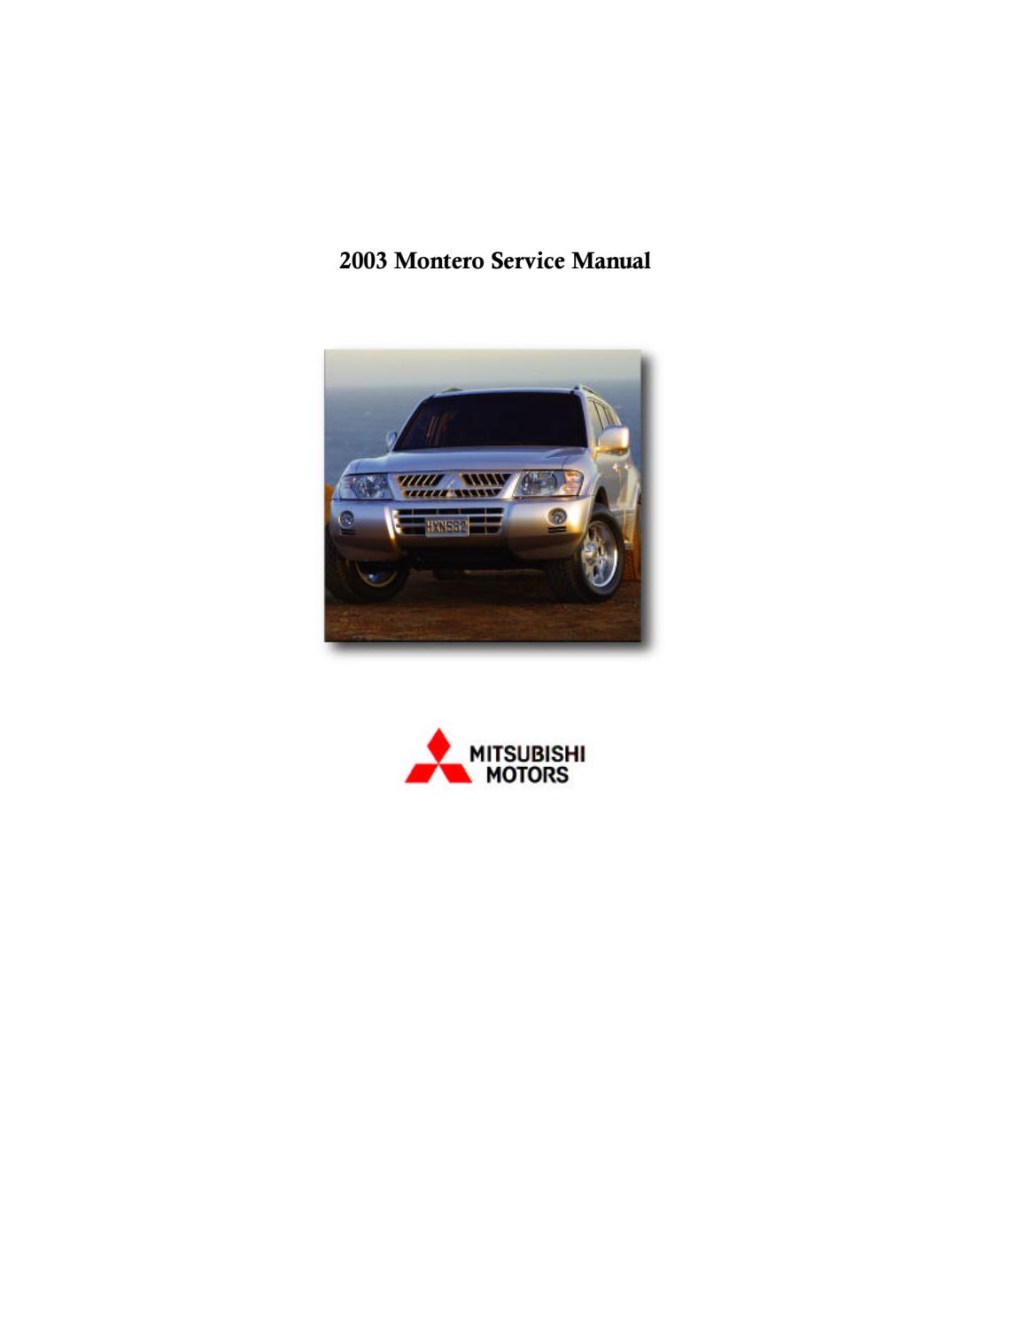 Picture of: MITSUBISHI MONTERO Service Repair Manual by  – Issuu